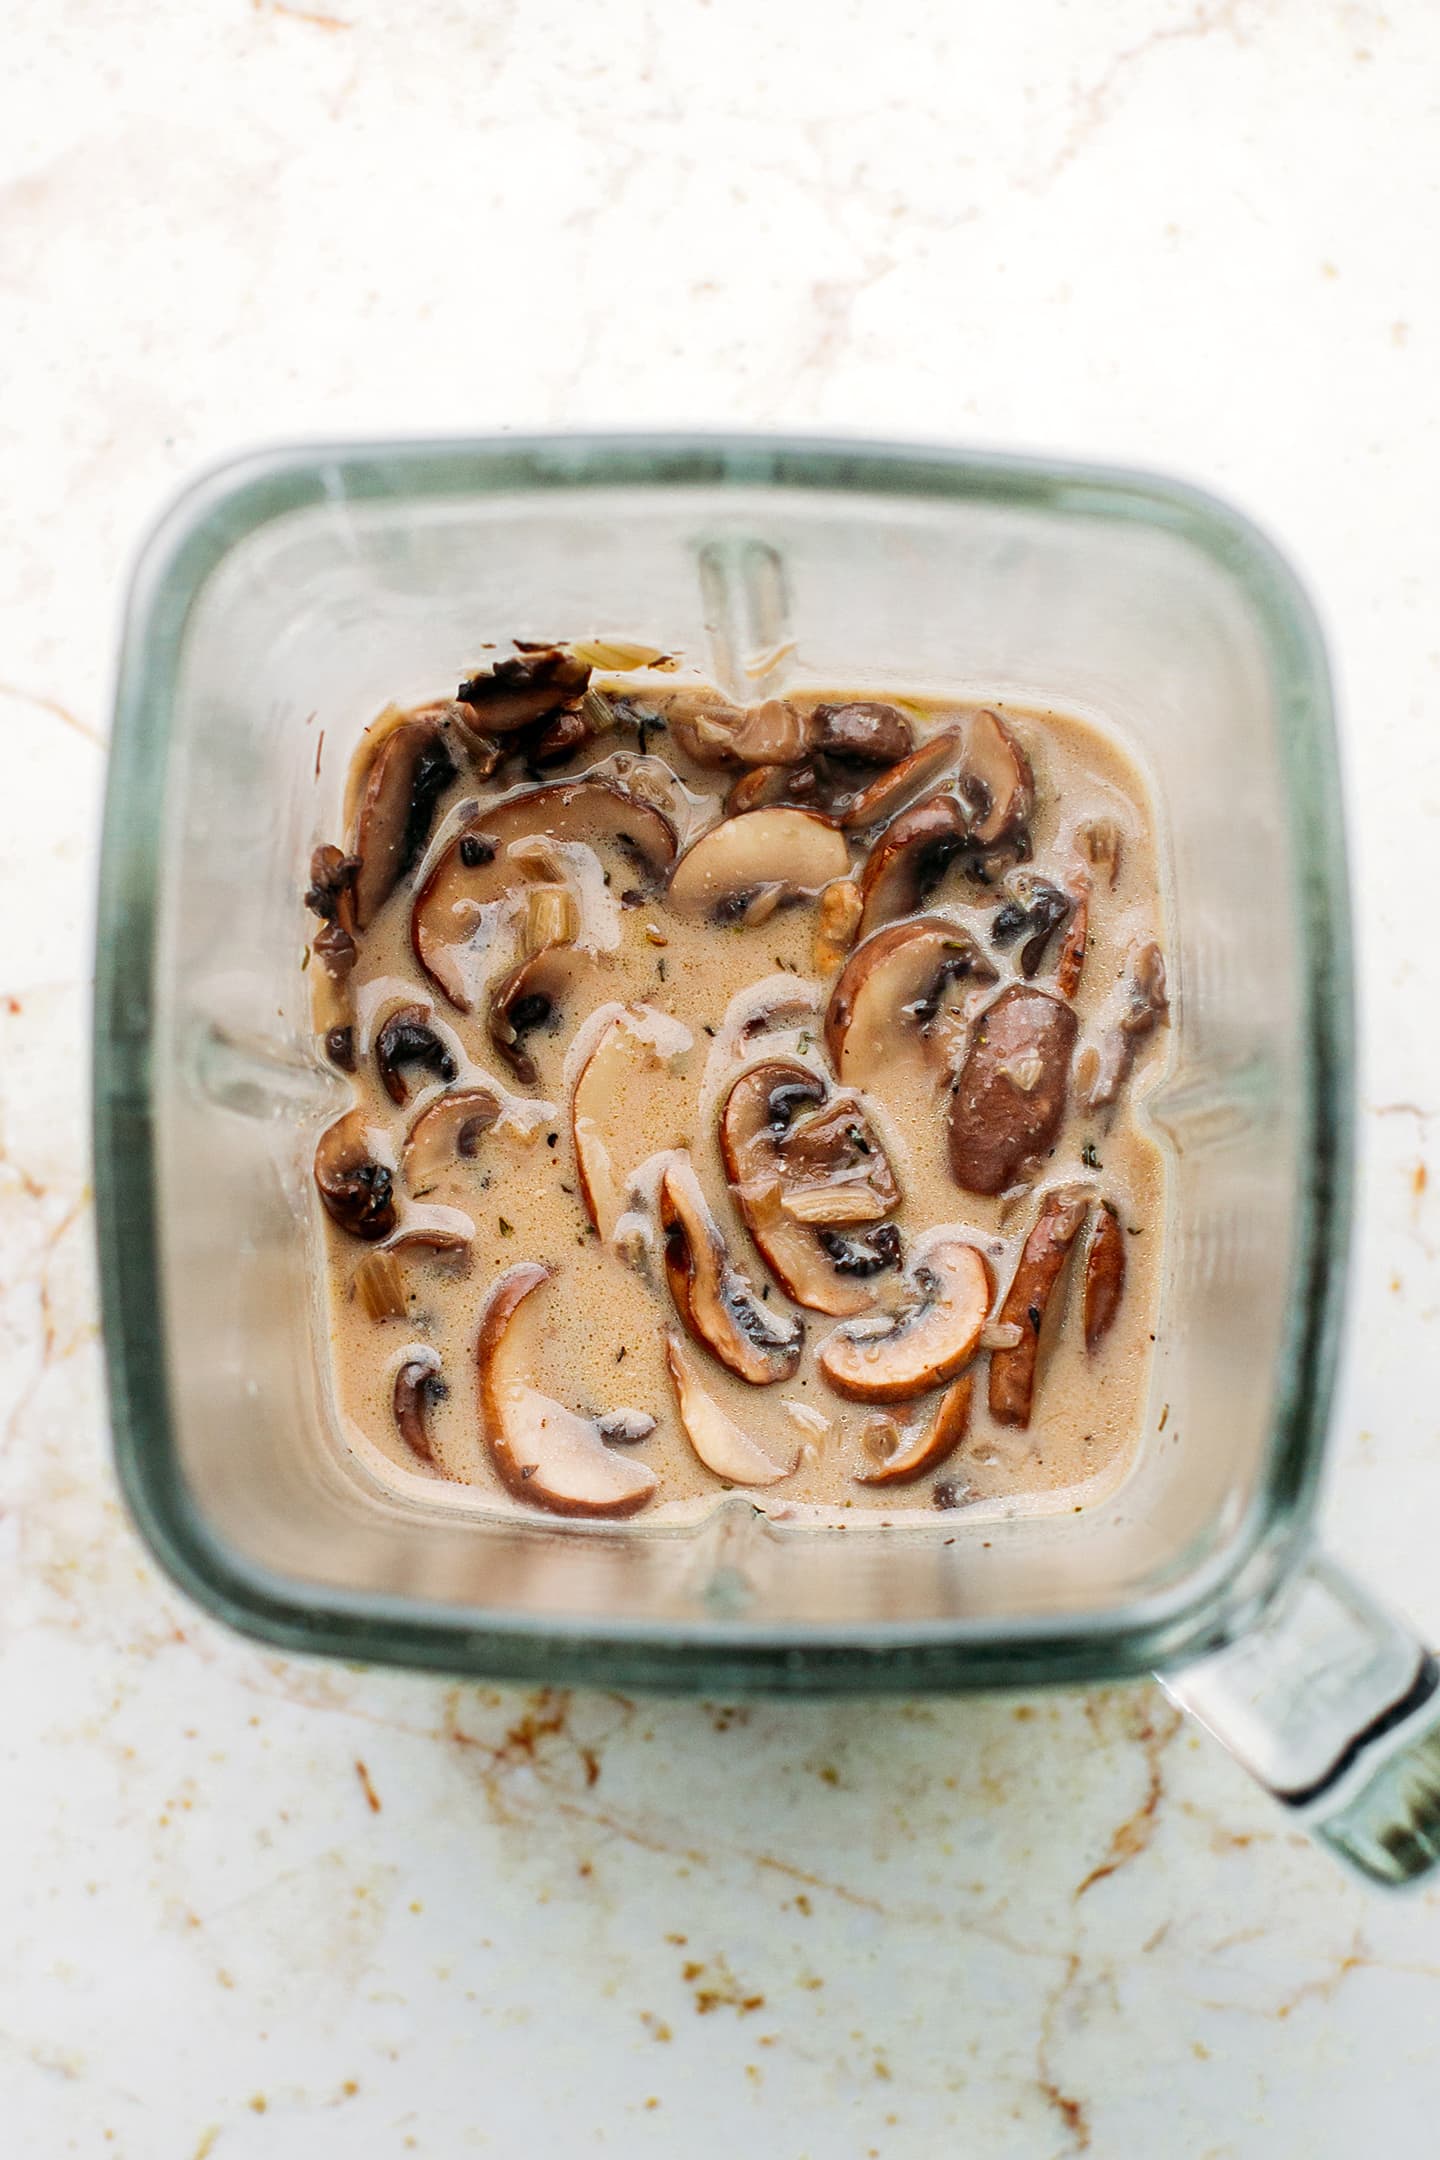 Cooked mushrooms and coconut milk in a blender.